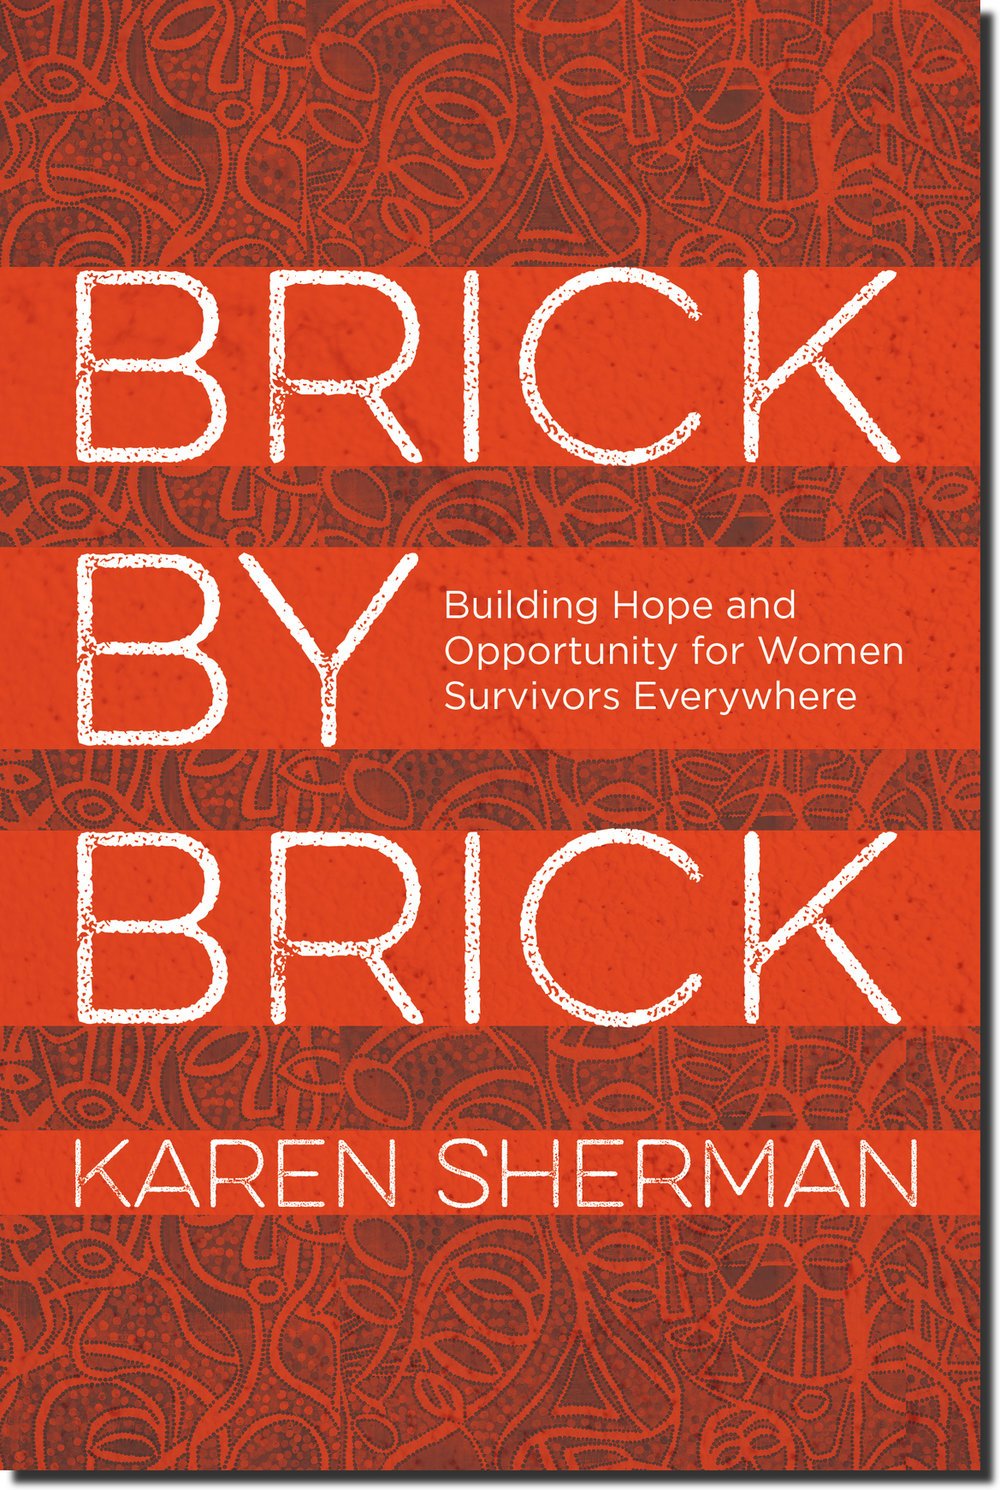 BRICK BY BRICK - Building Hope and Opportunity for Women Survivors Everywhere